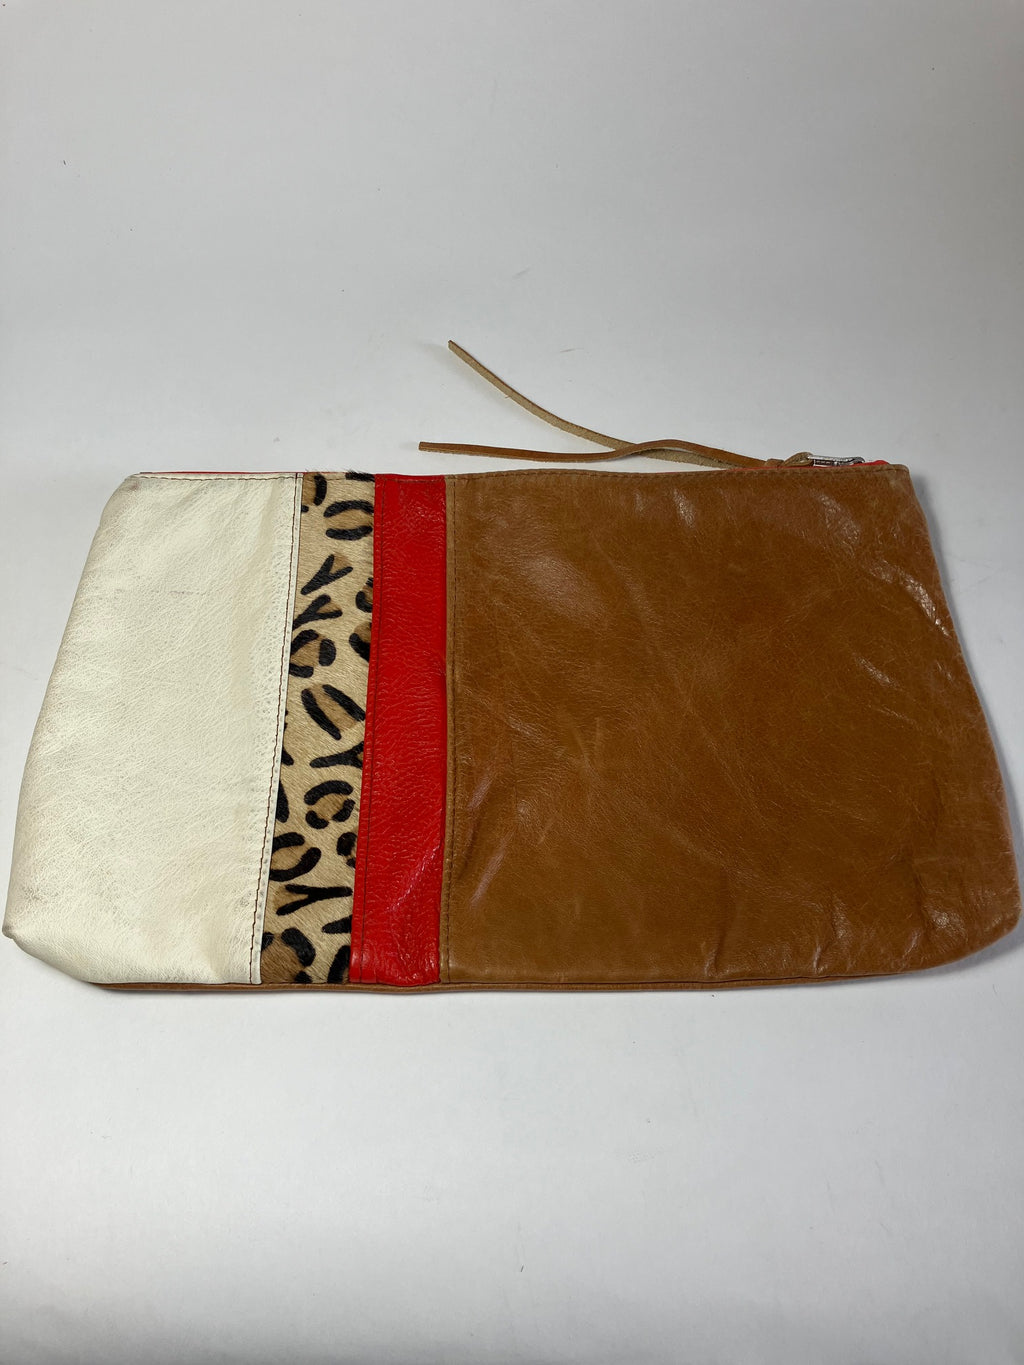 ONE OF A KIND - SAMPLE Leather clutch bag tan brown, fire red, leopard and ivory